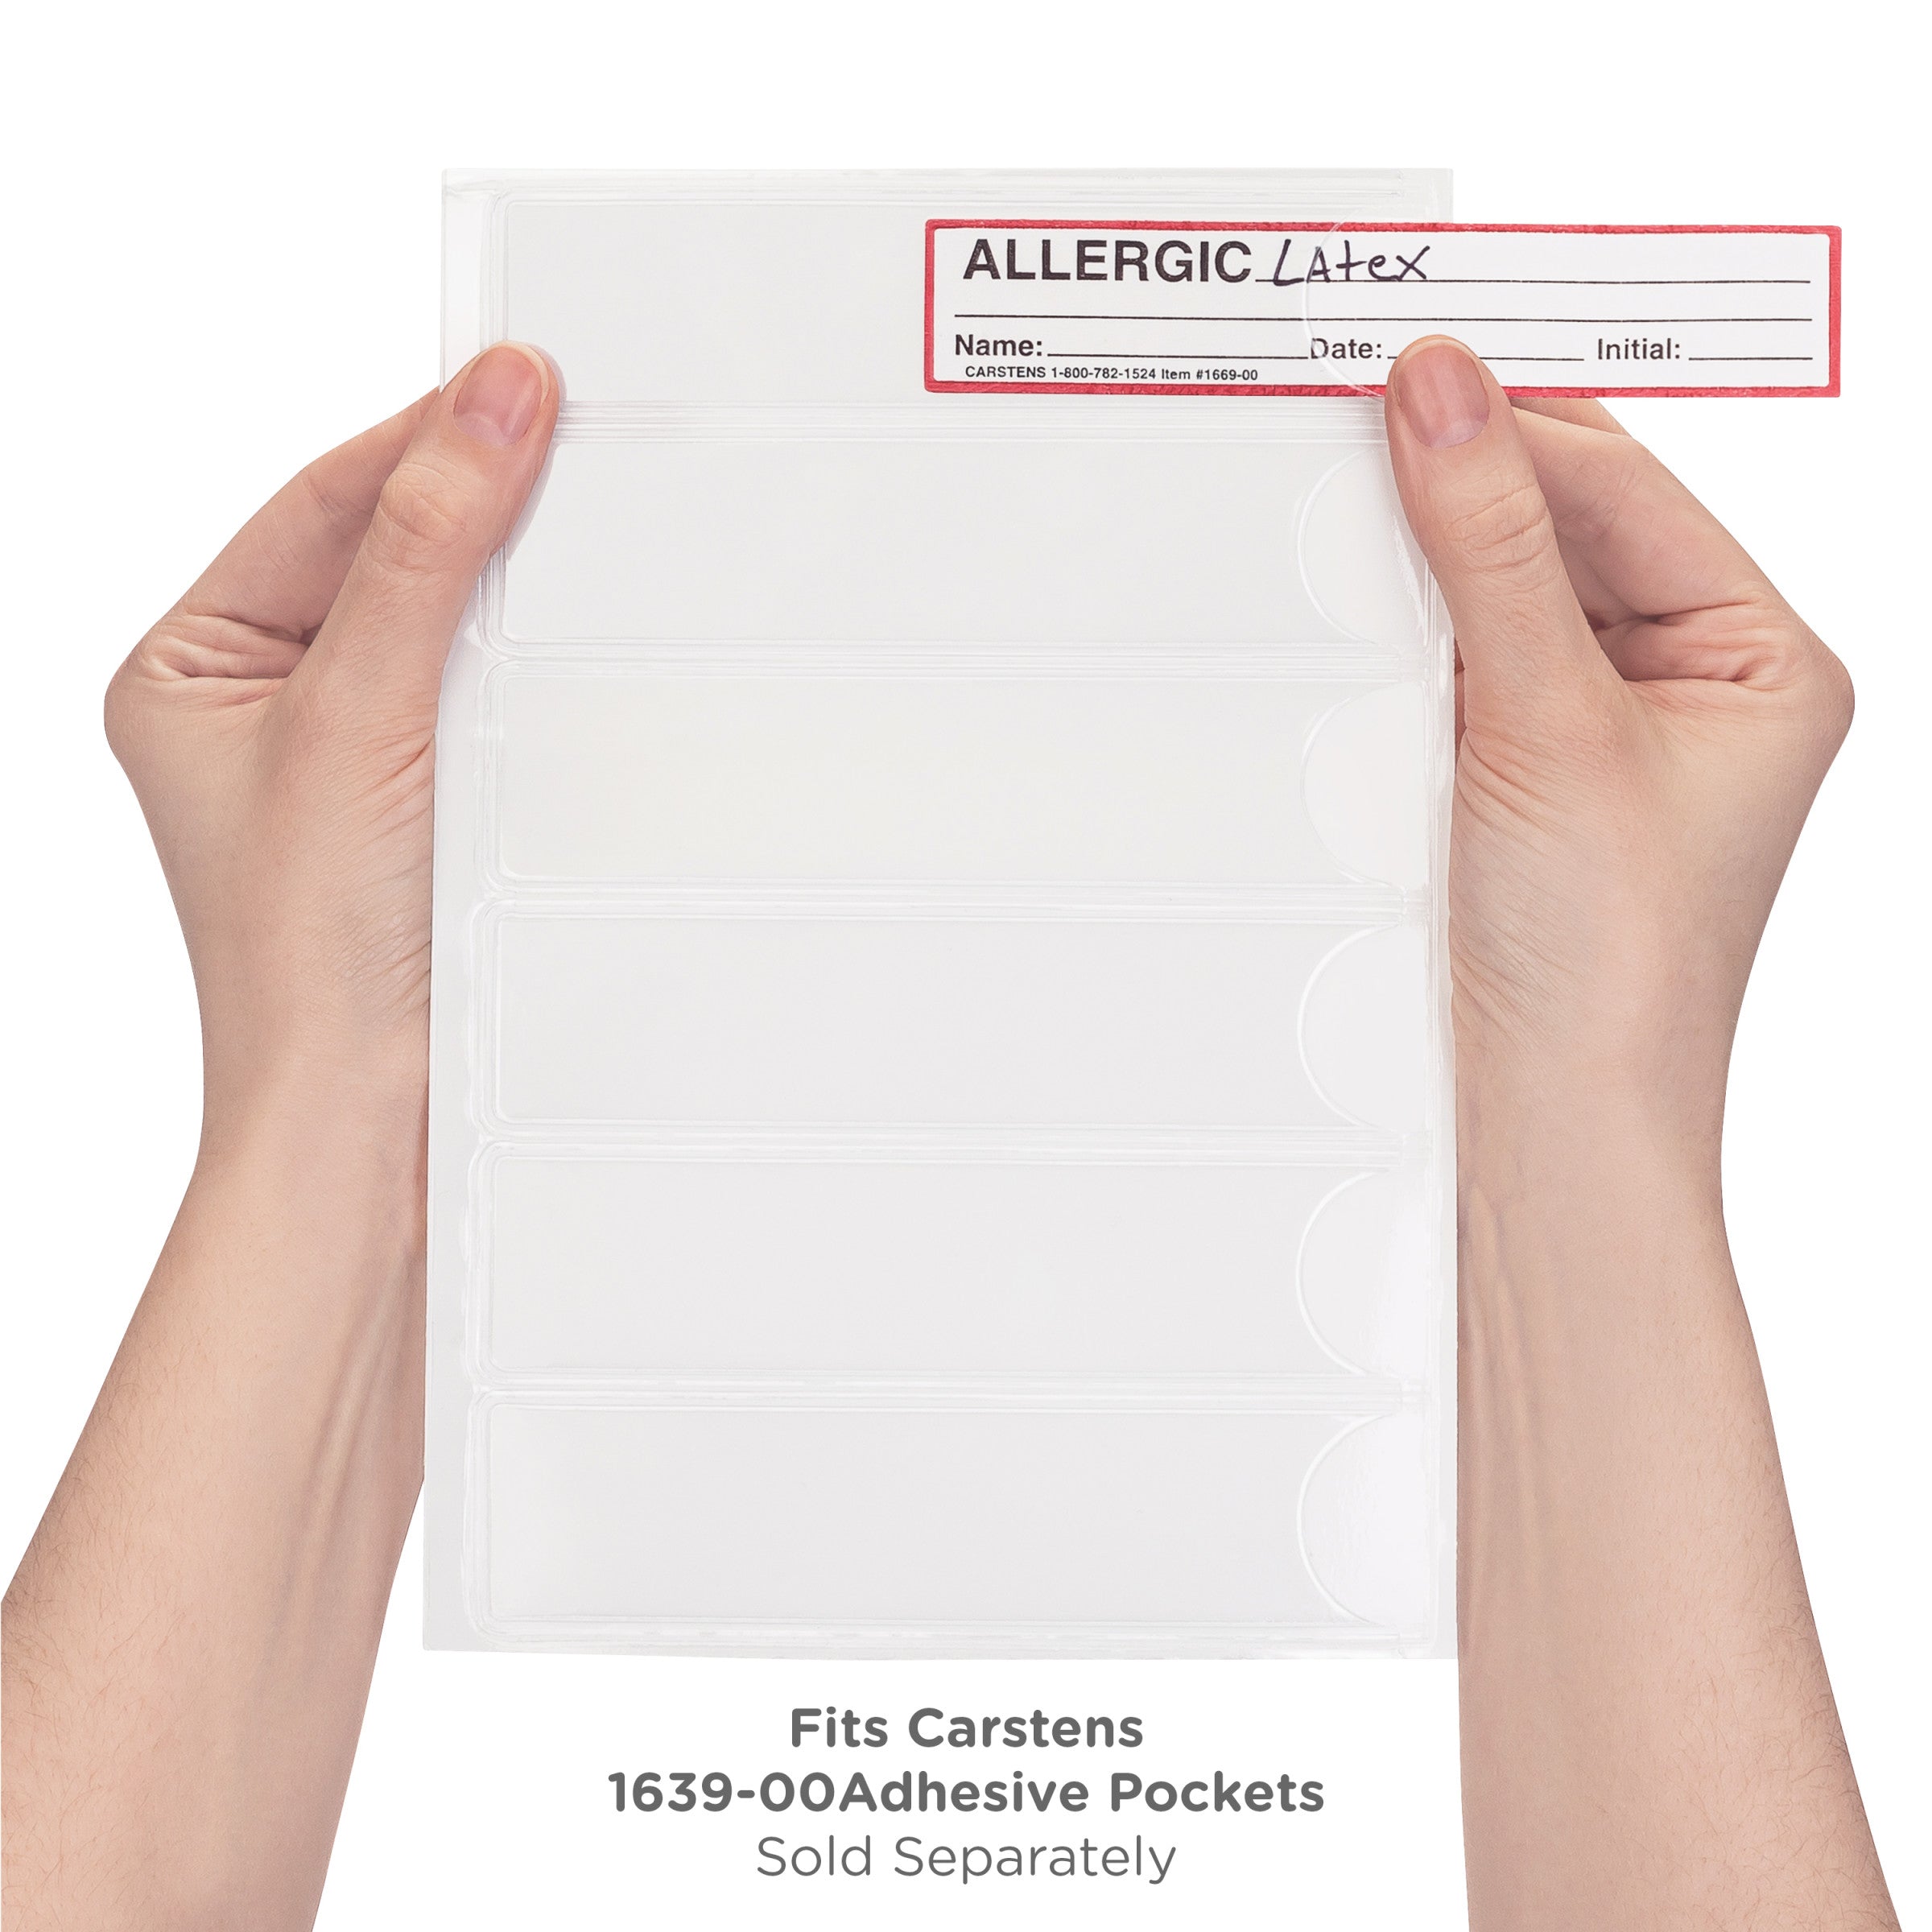 Allergic with Signature Line Alert/Instruction Card, White, W5.25" x H1" (100 pack)